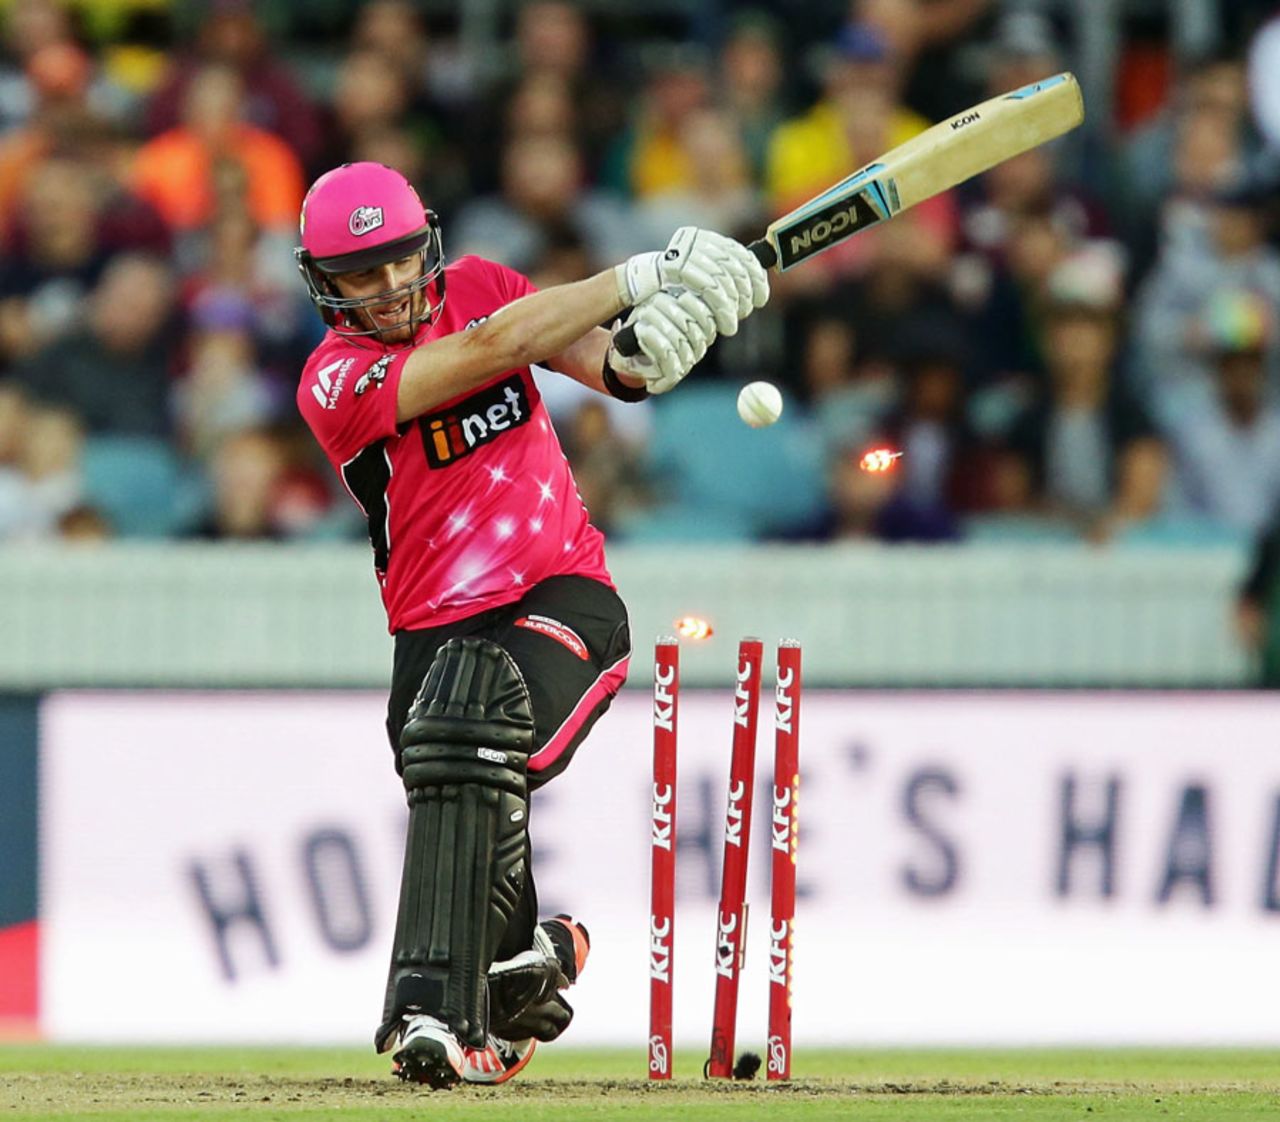 Riki Wessels was bowled for 2 in the third over, Perth Scorchers v Sydney Sixers, Big Bash League 2014-15, final, Canberra, January 28, 2015